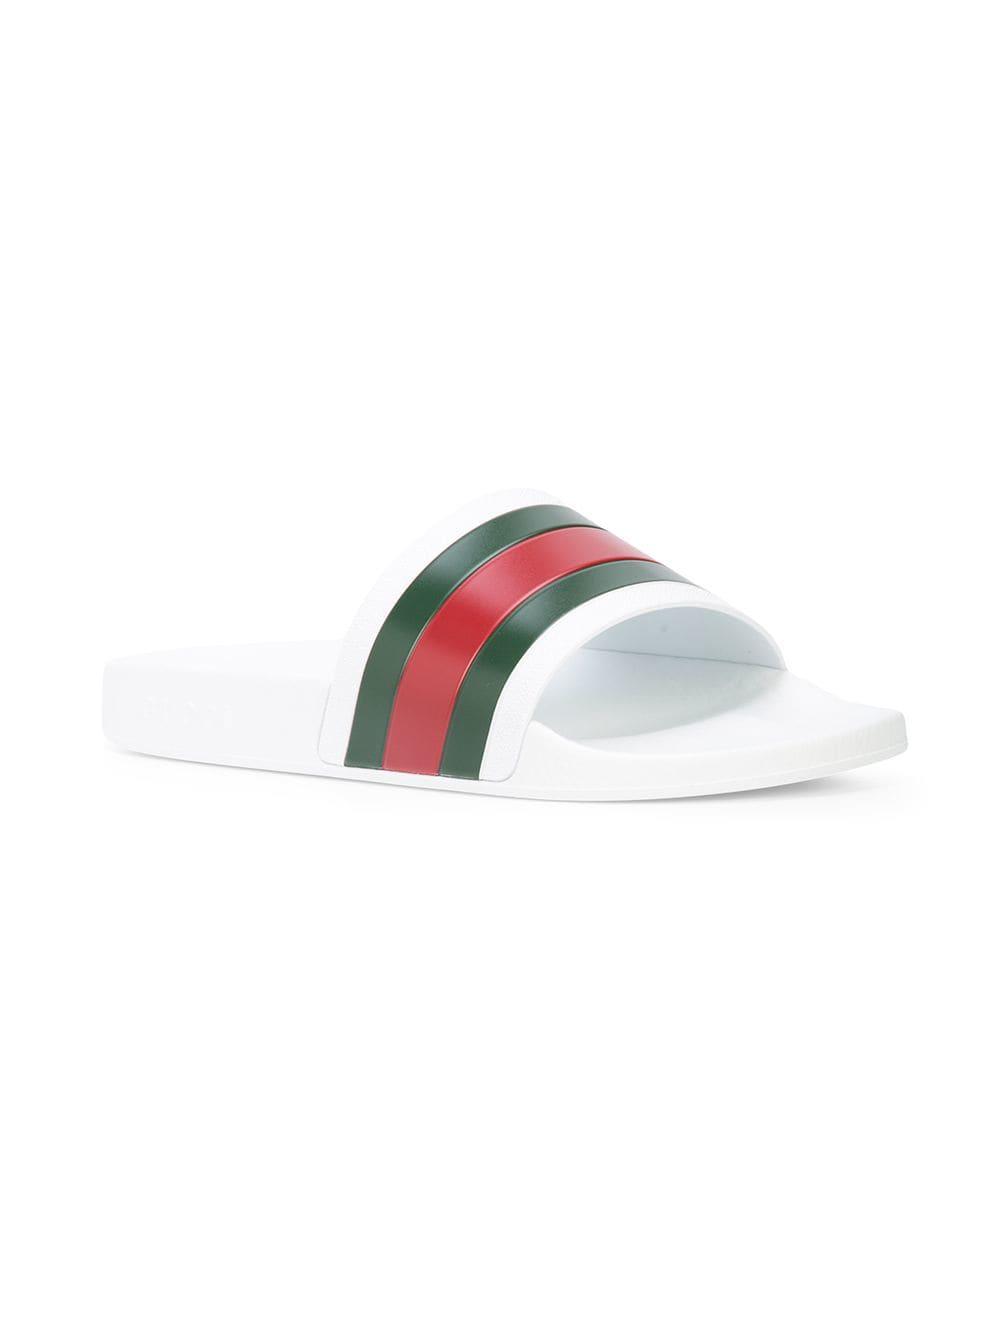 all white gucci slides, OFF 71%,www 